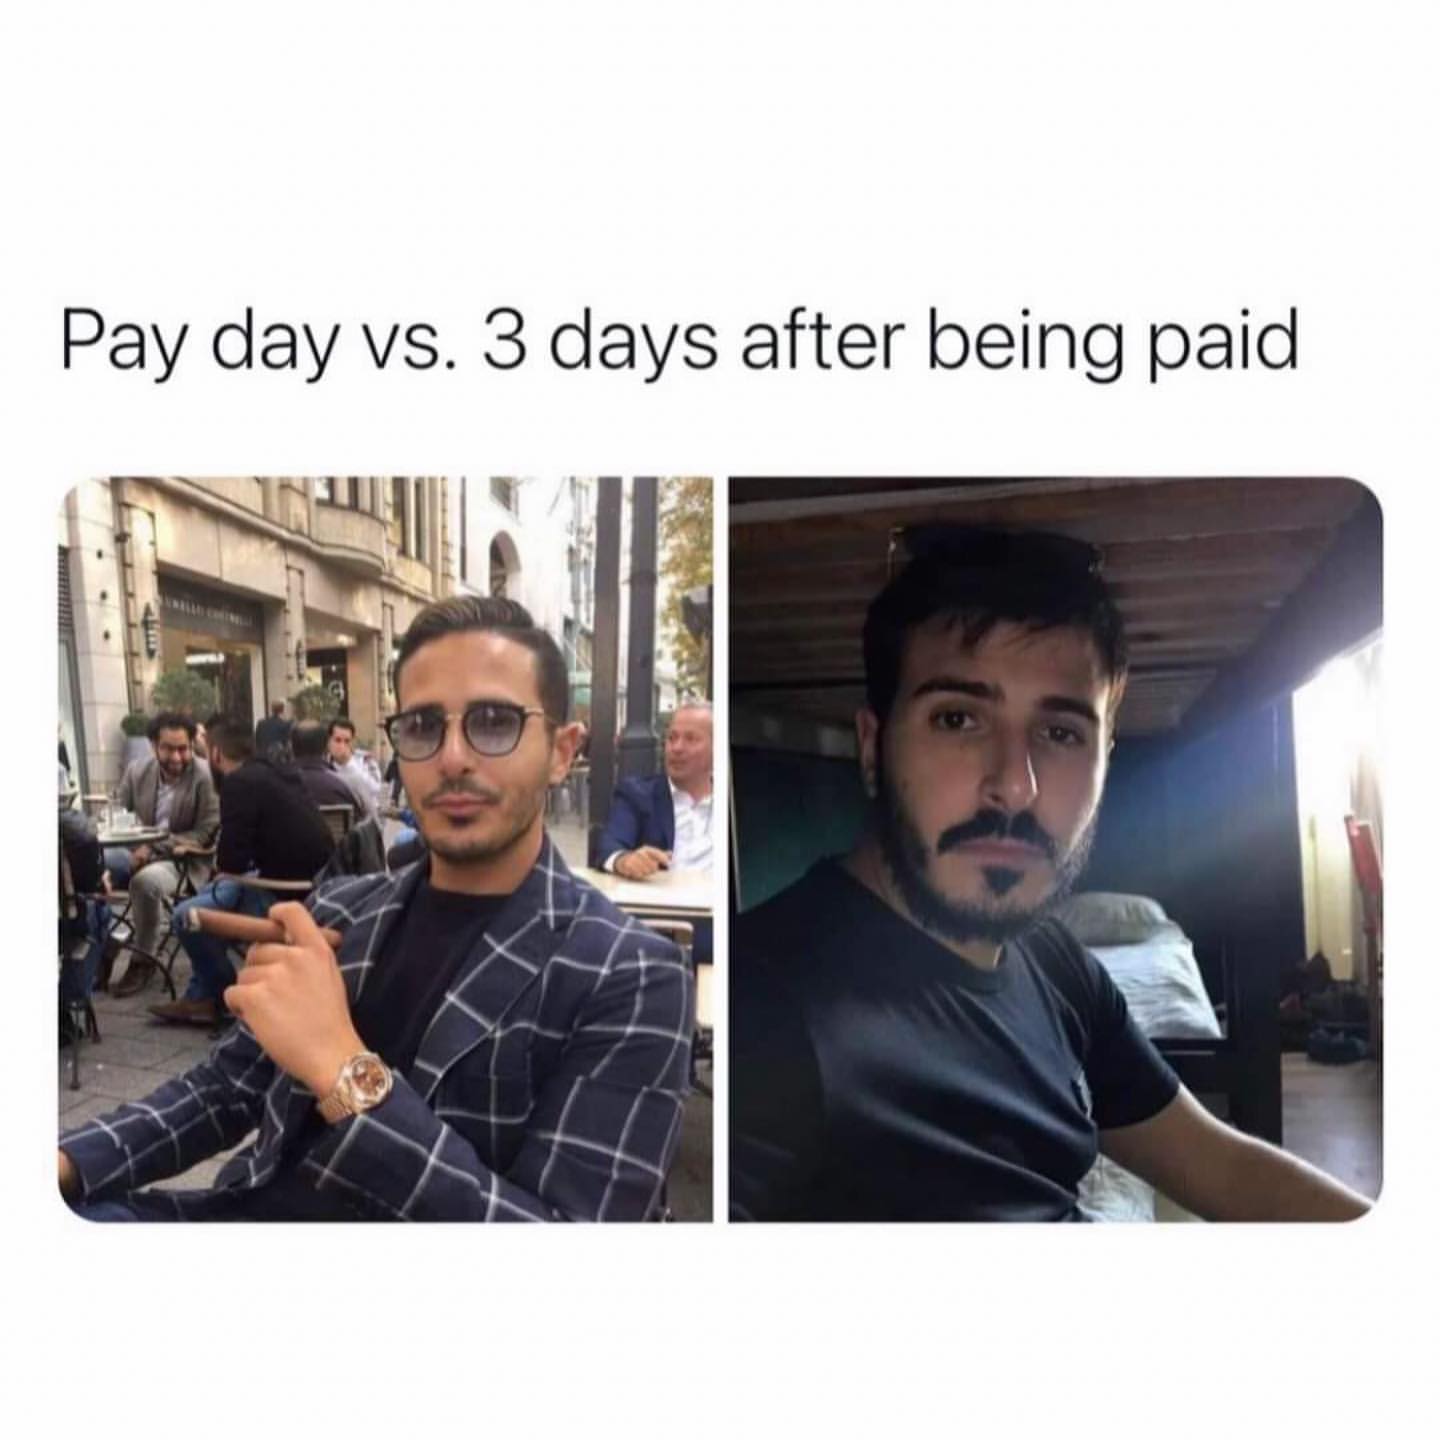 Pay day vs. 3 days after being paid.